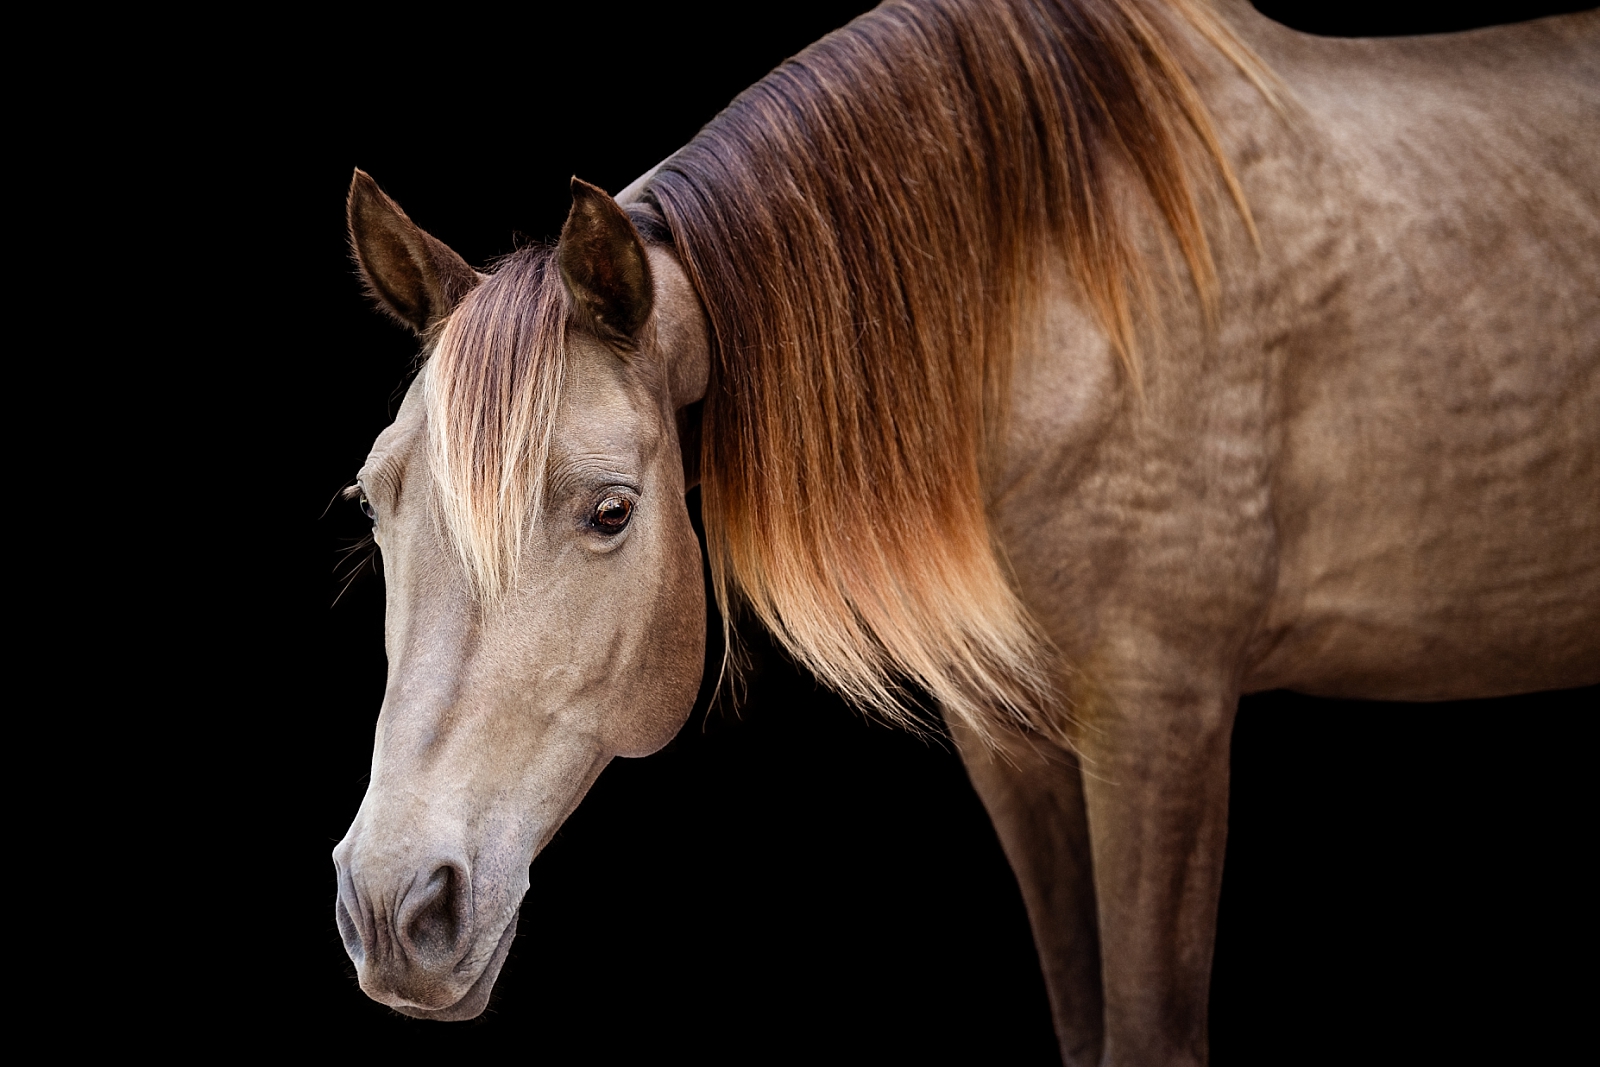 Horse art in Ocala of unique colored Tennessee Walking Horse mare by professional equine photographer in Florida.